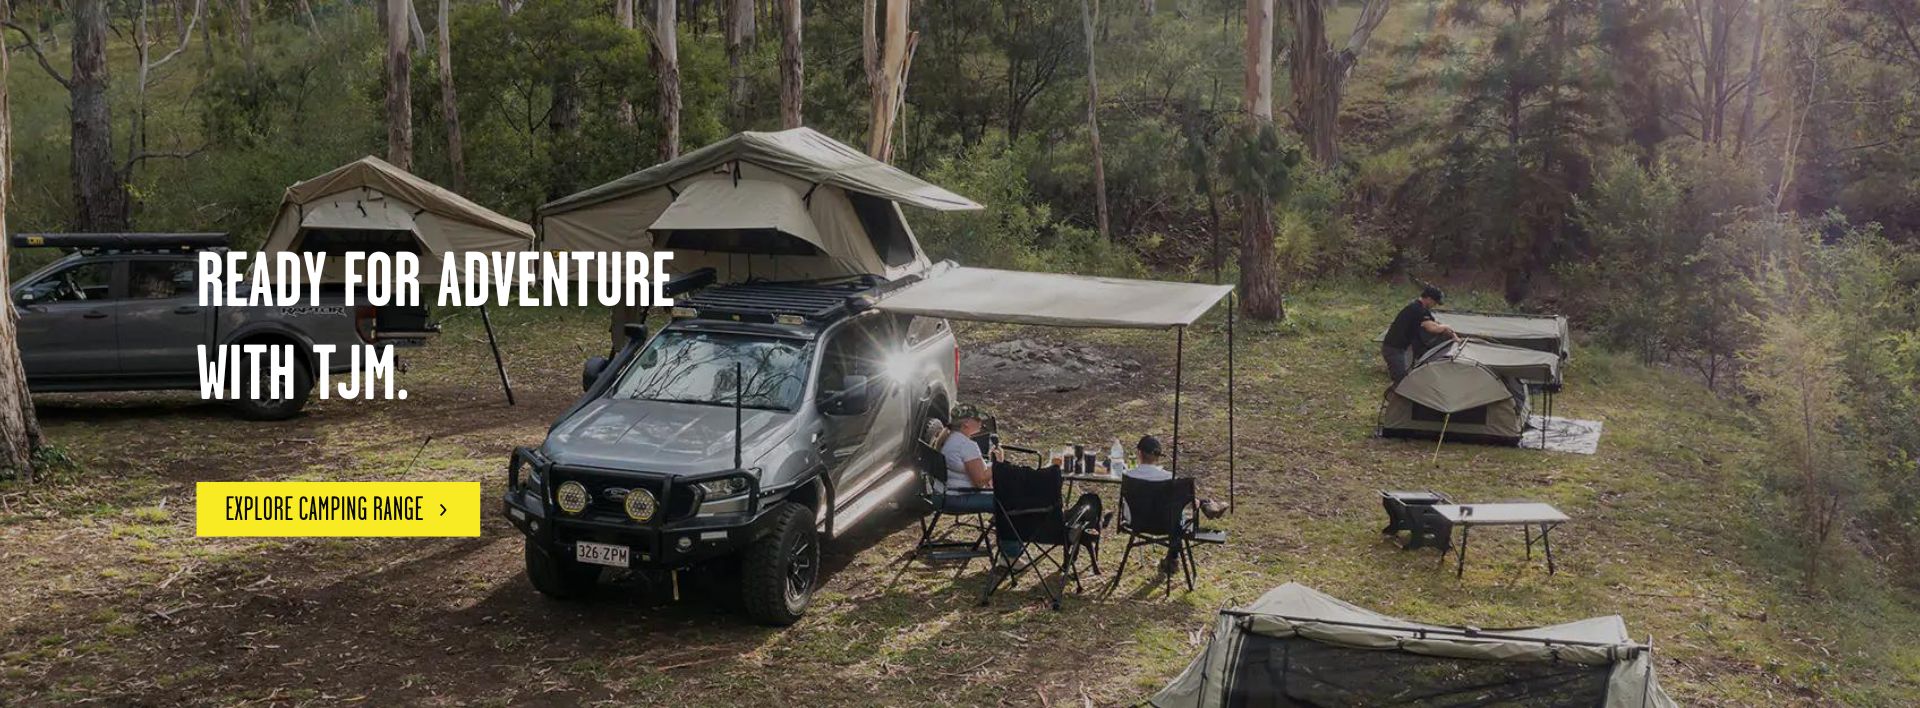 Ready for Adventure with TJM - Explore Camping Range